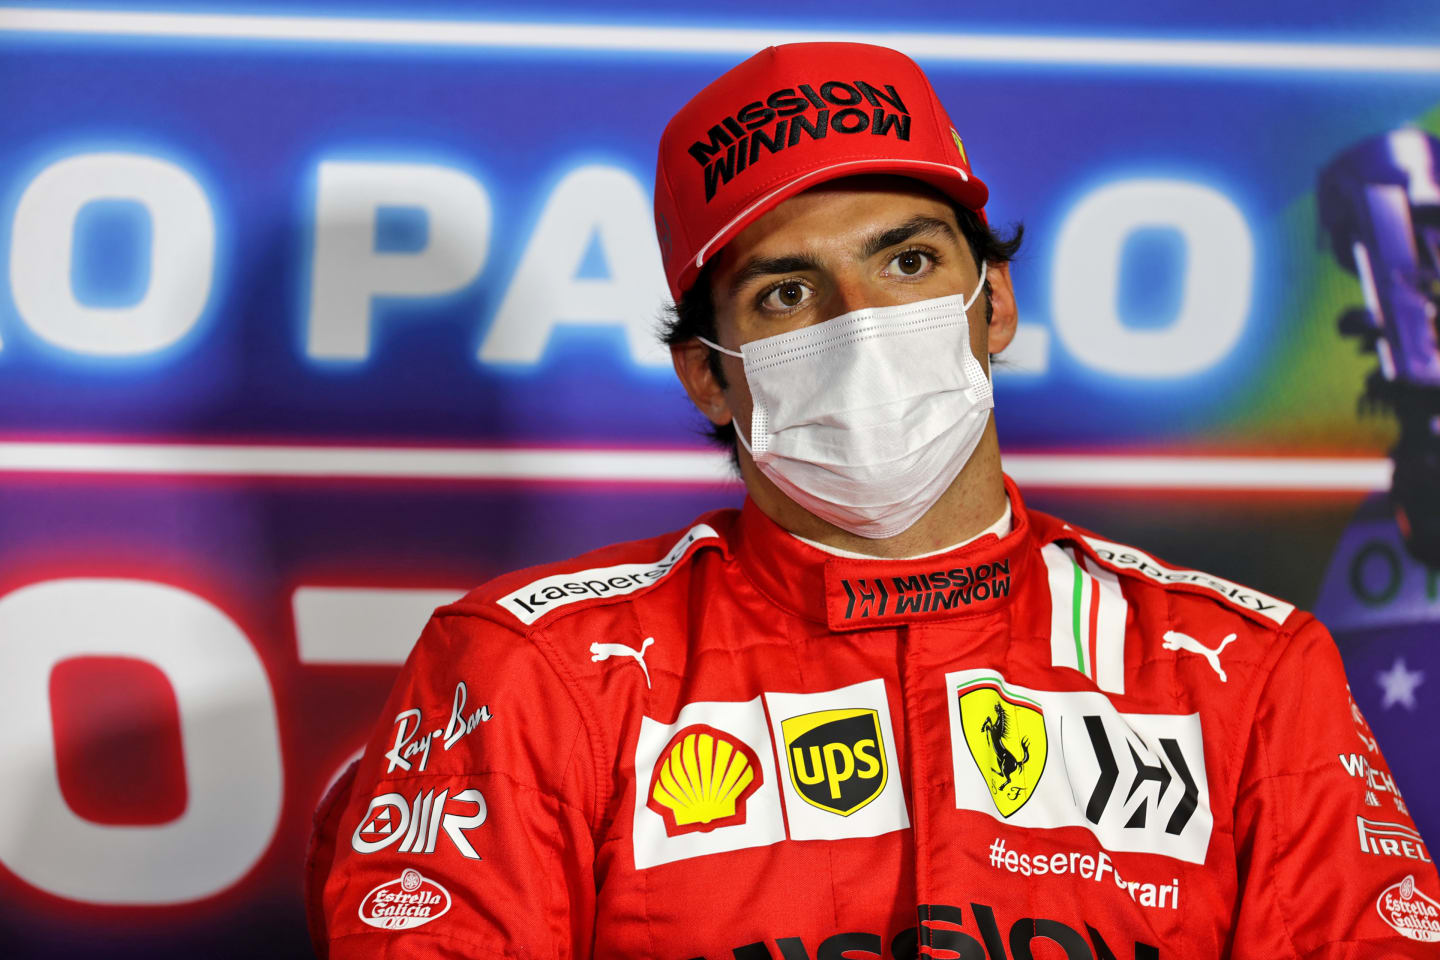 SAO PAULO, BRAZIL - NOVEMBER 13: Third placed Carlos Sainz of Spain and Ferrari talks in the press conference after the sprint ahead of the F1 Grand Prix of Brazil at Autodromo Jose Carlos Pace on November 13, 2021 in Sao Paulo, Brazil. (Photo by XPB - Pool/Getty Images)